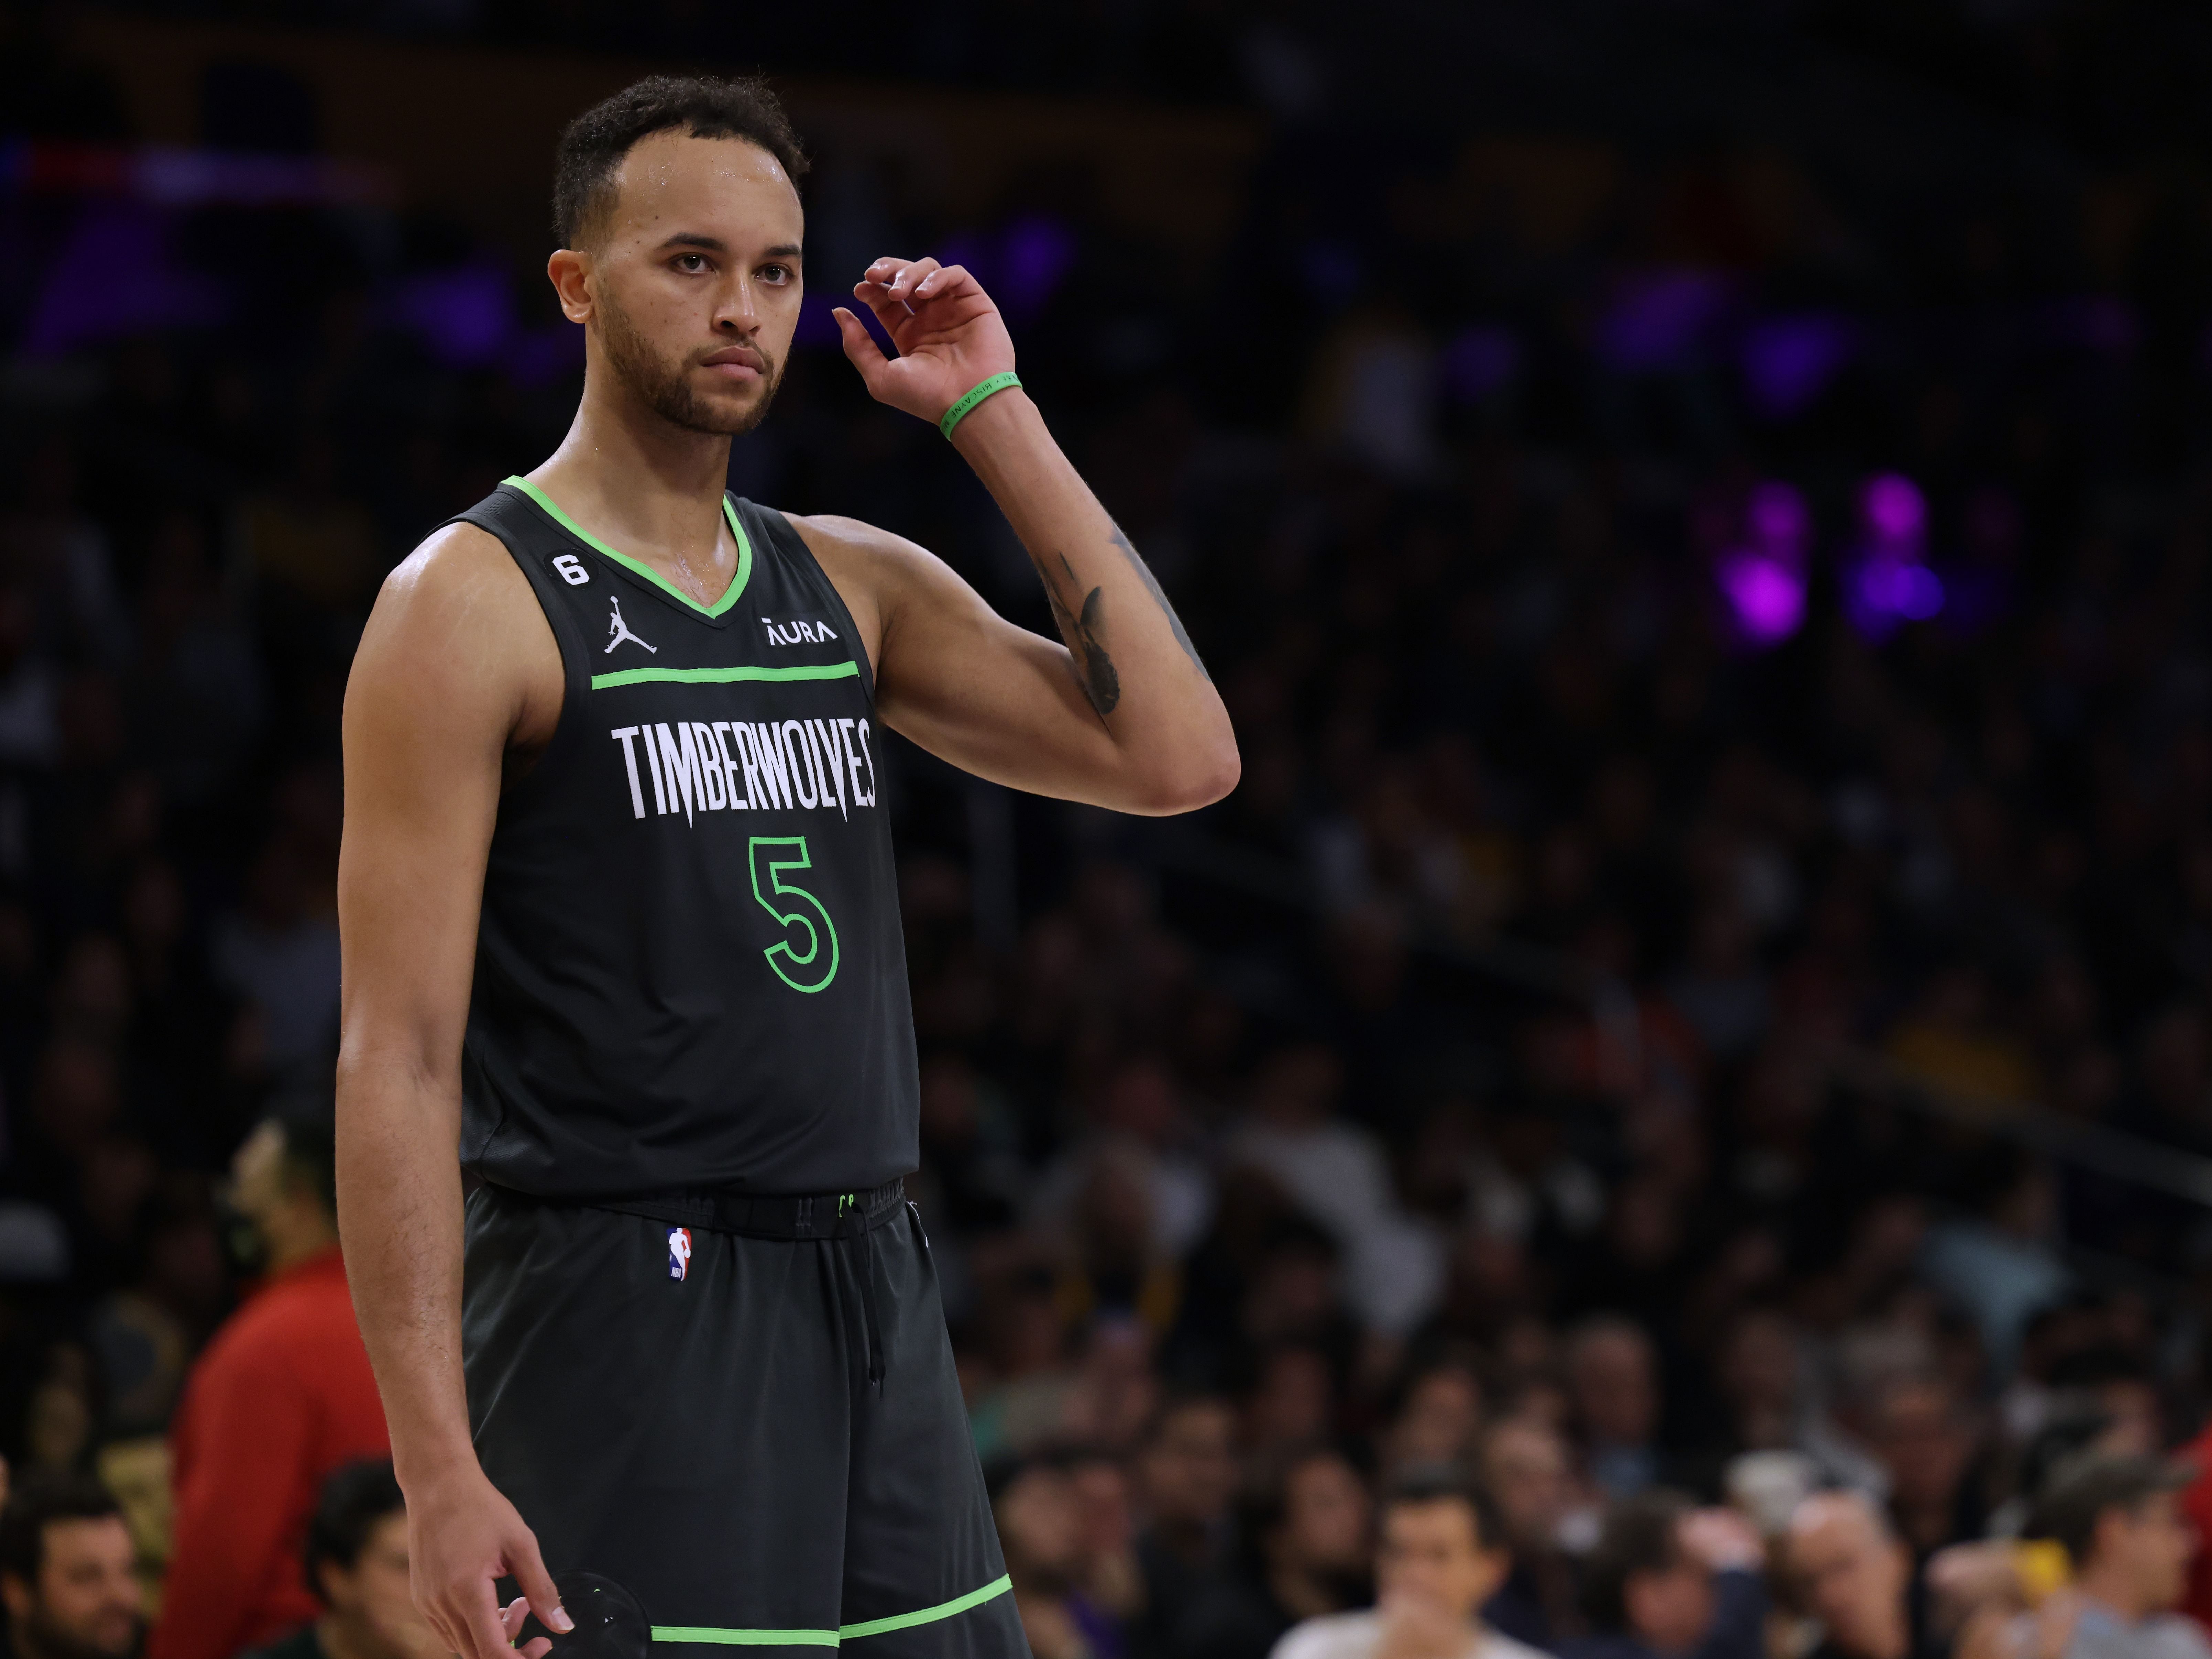 Is Timberwolves&rsquo; forward Kyle Anderson Chinese? 